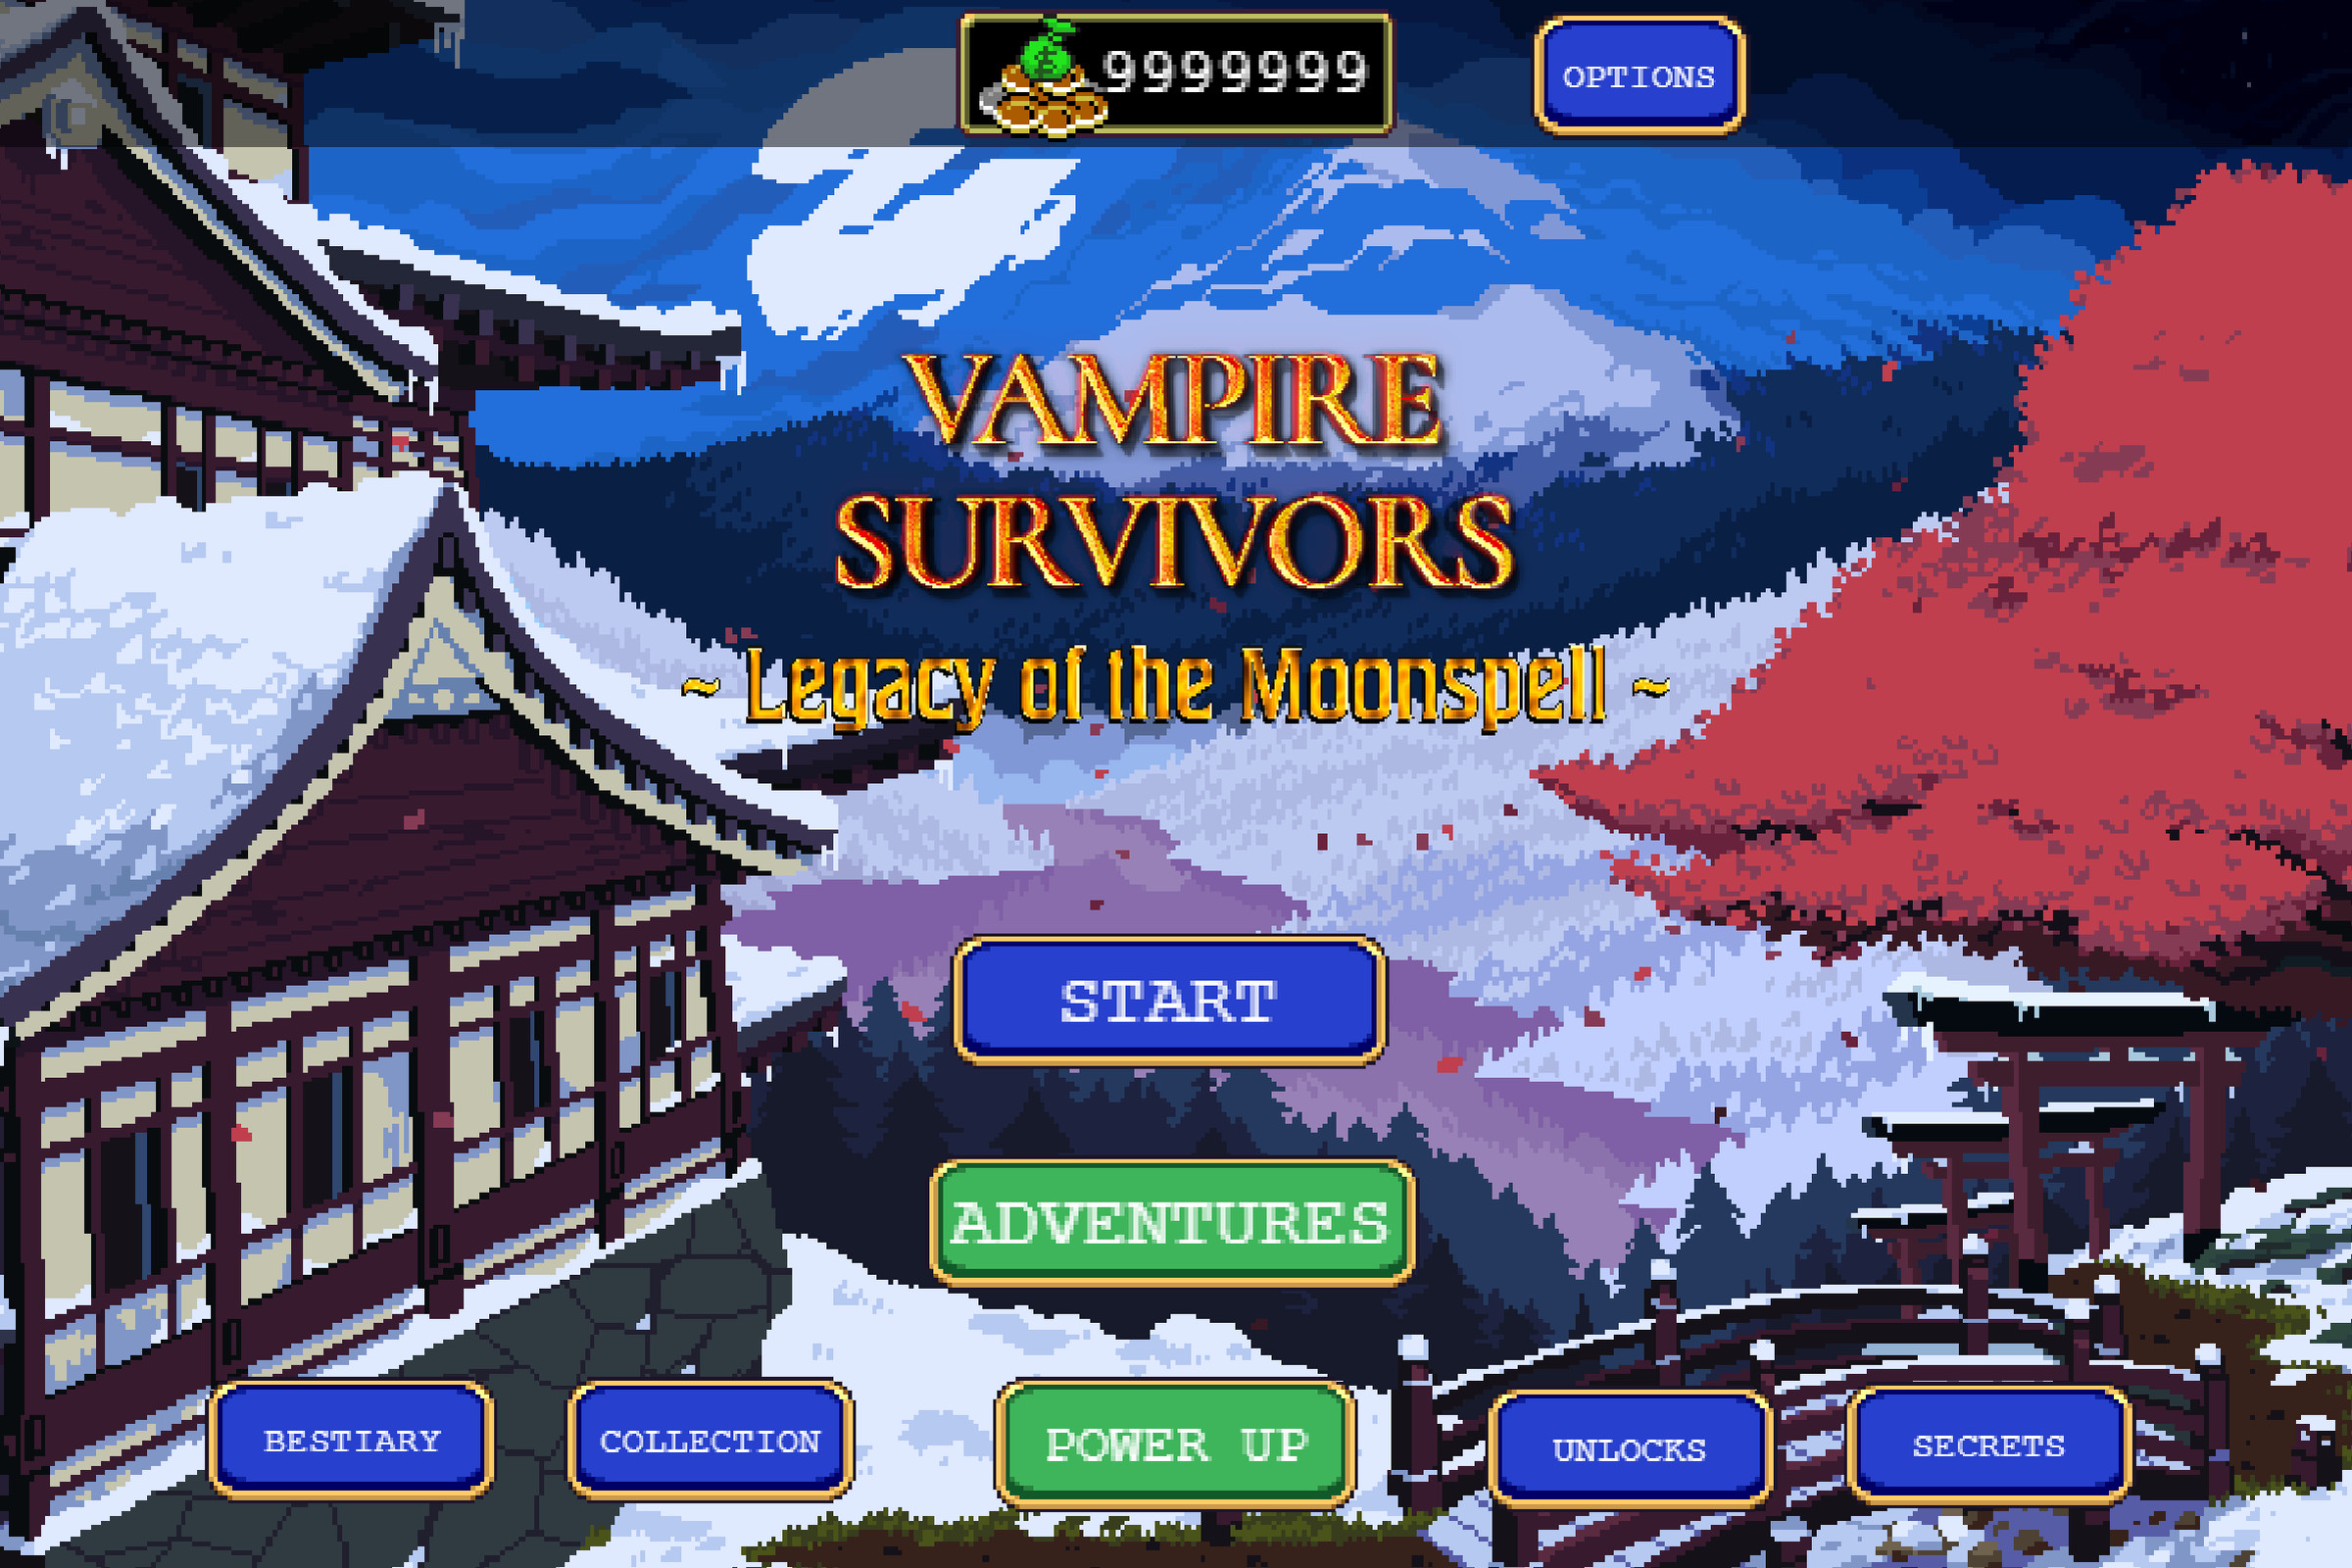 A screenshot of the Vampire Survivors title screen with a new button that says “Adventures.”